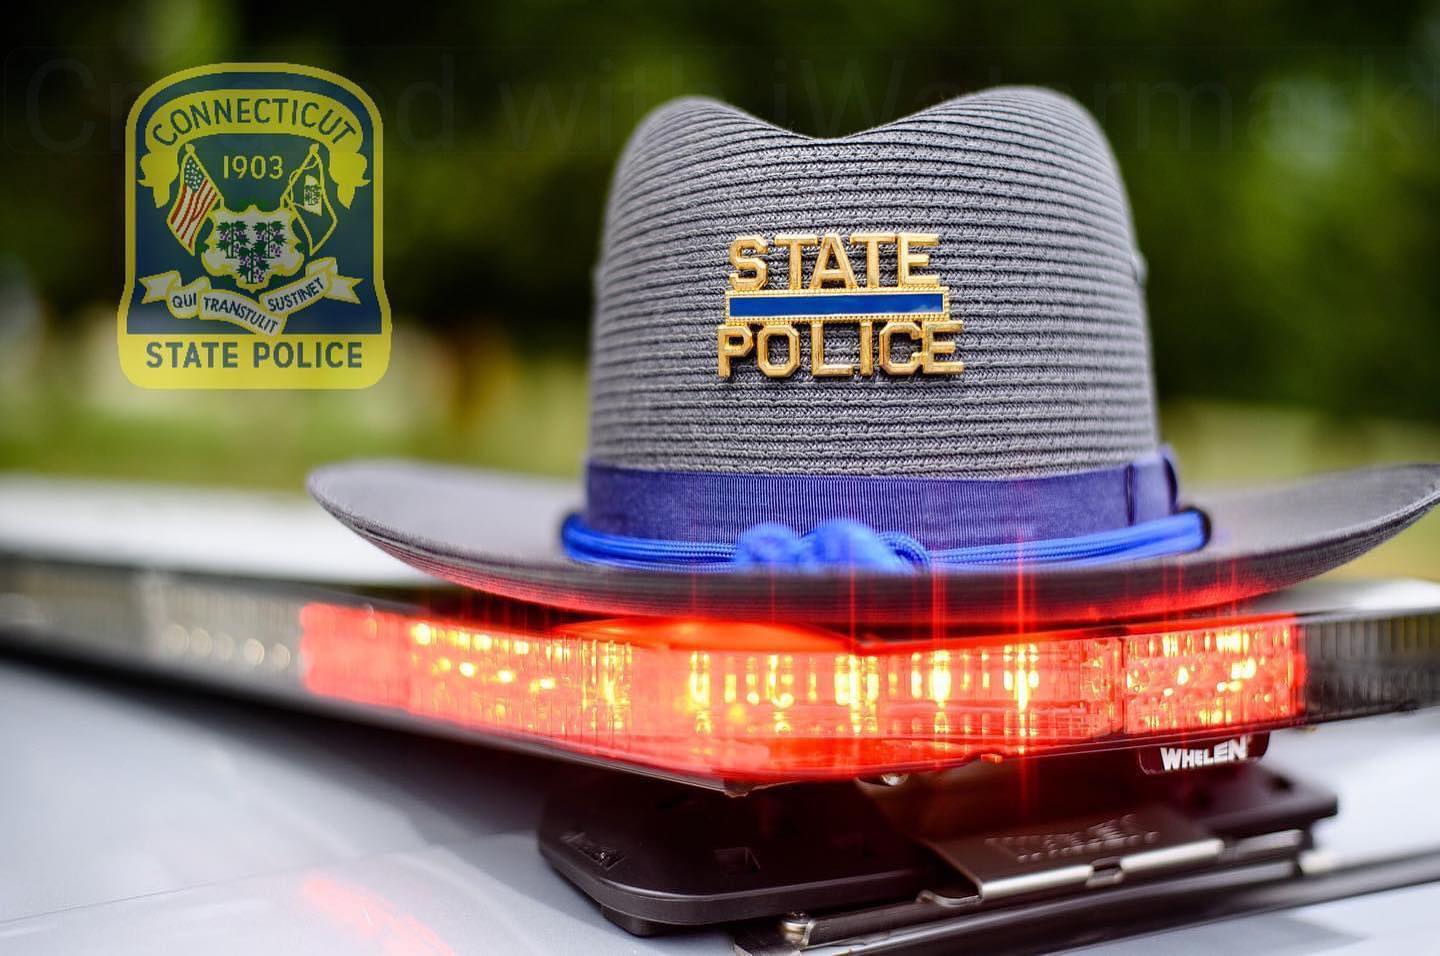 The Fitch Files: Arrested twice for multiple felonies and misdemeanors, a Connecticut State Trooper remains on the payroll